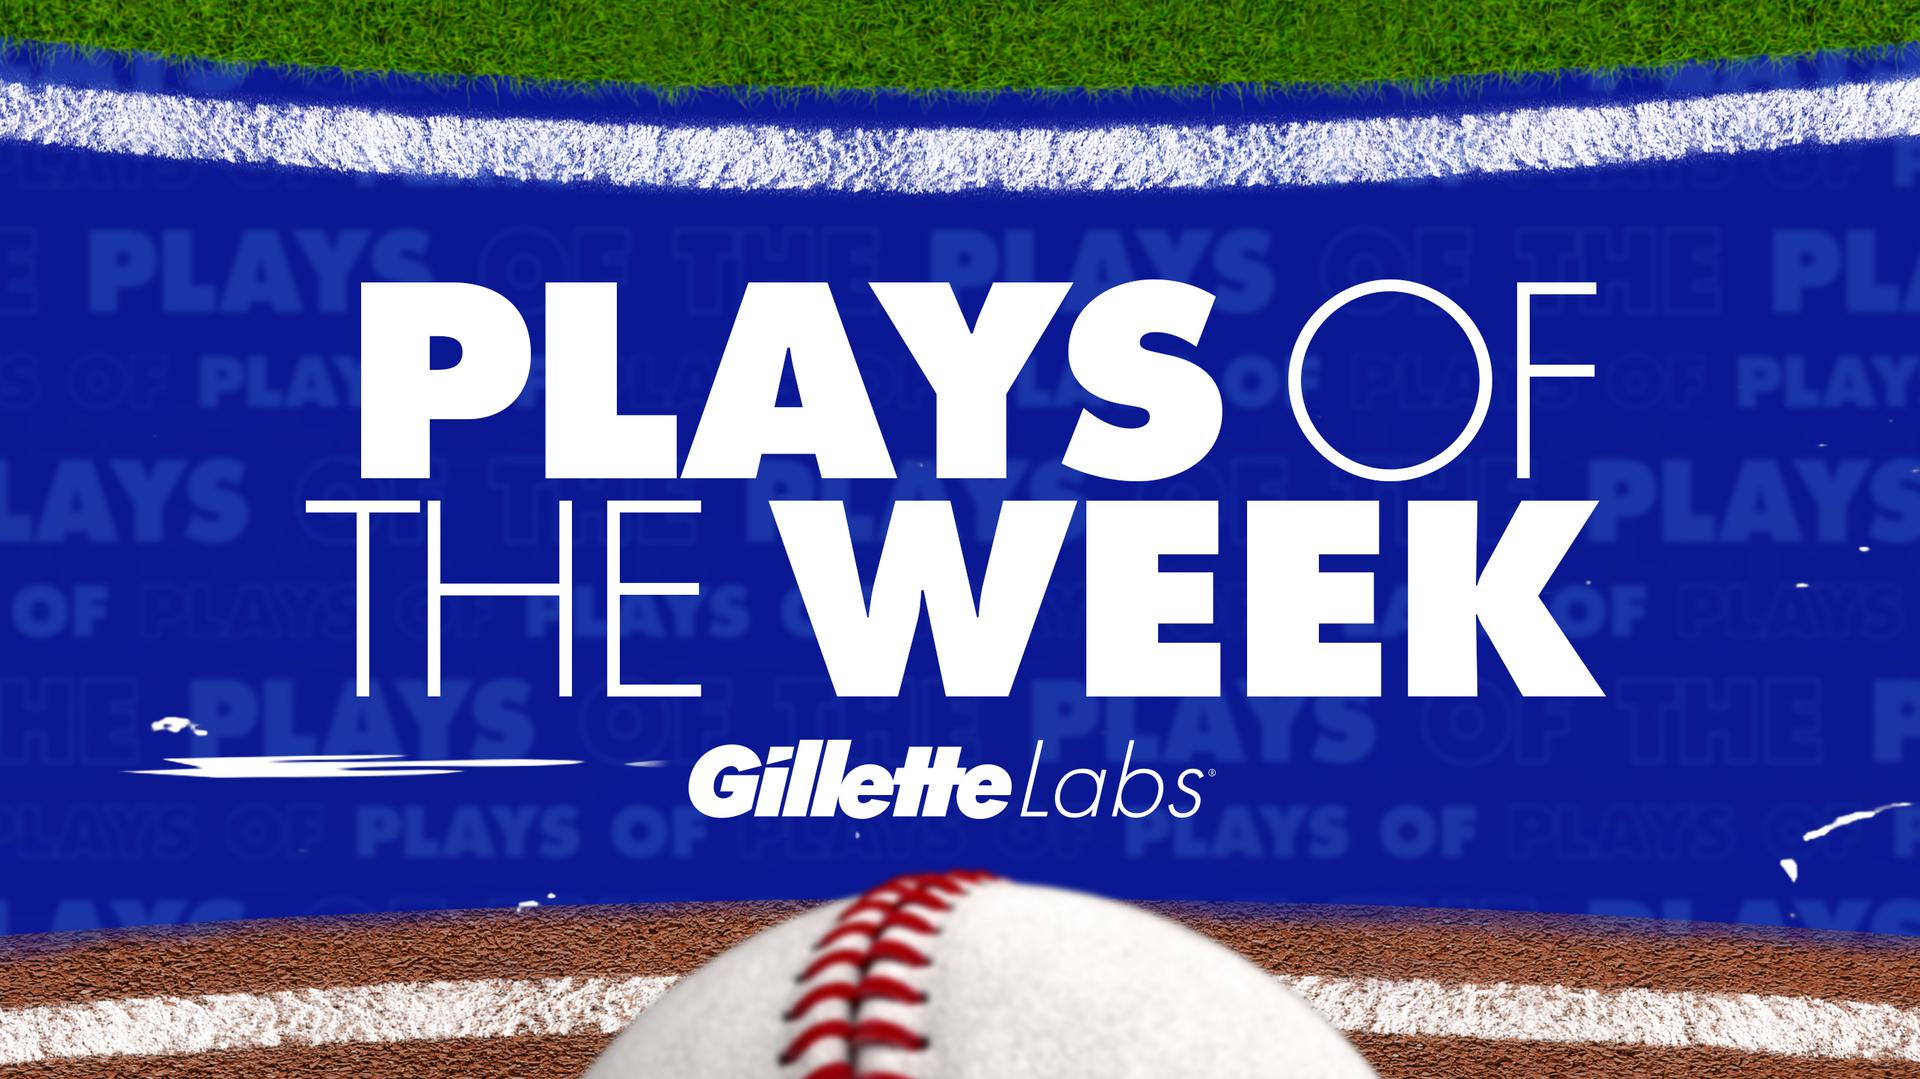 A blue image with the Plays of the Week logo